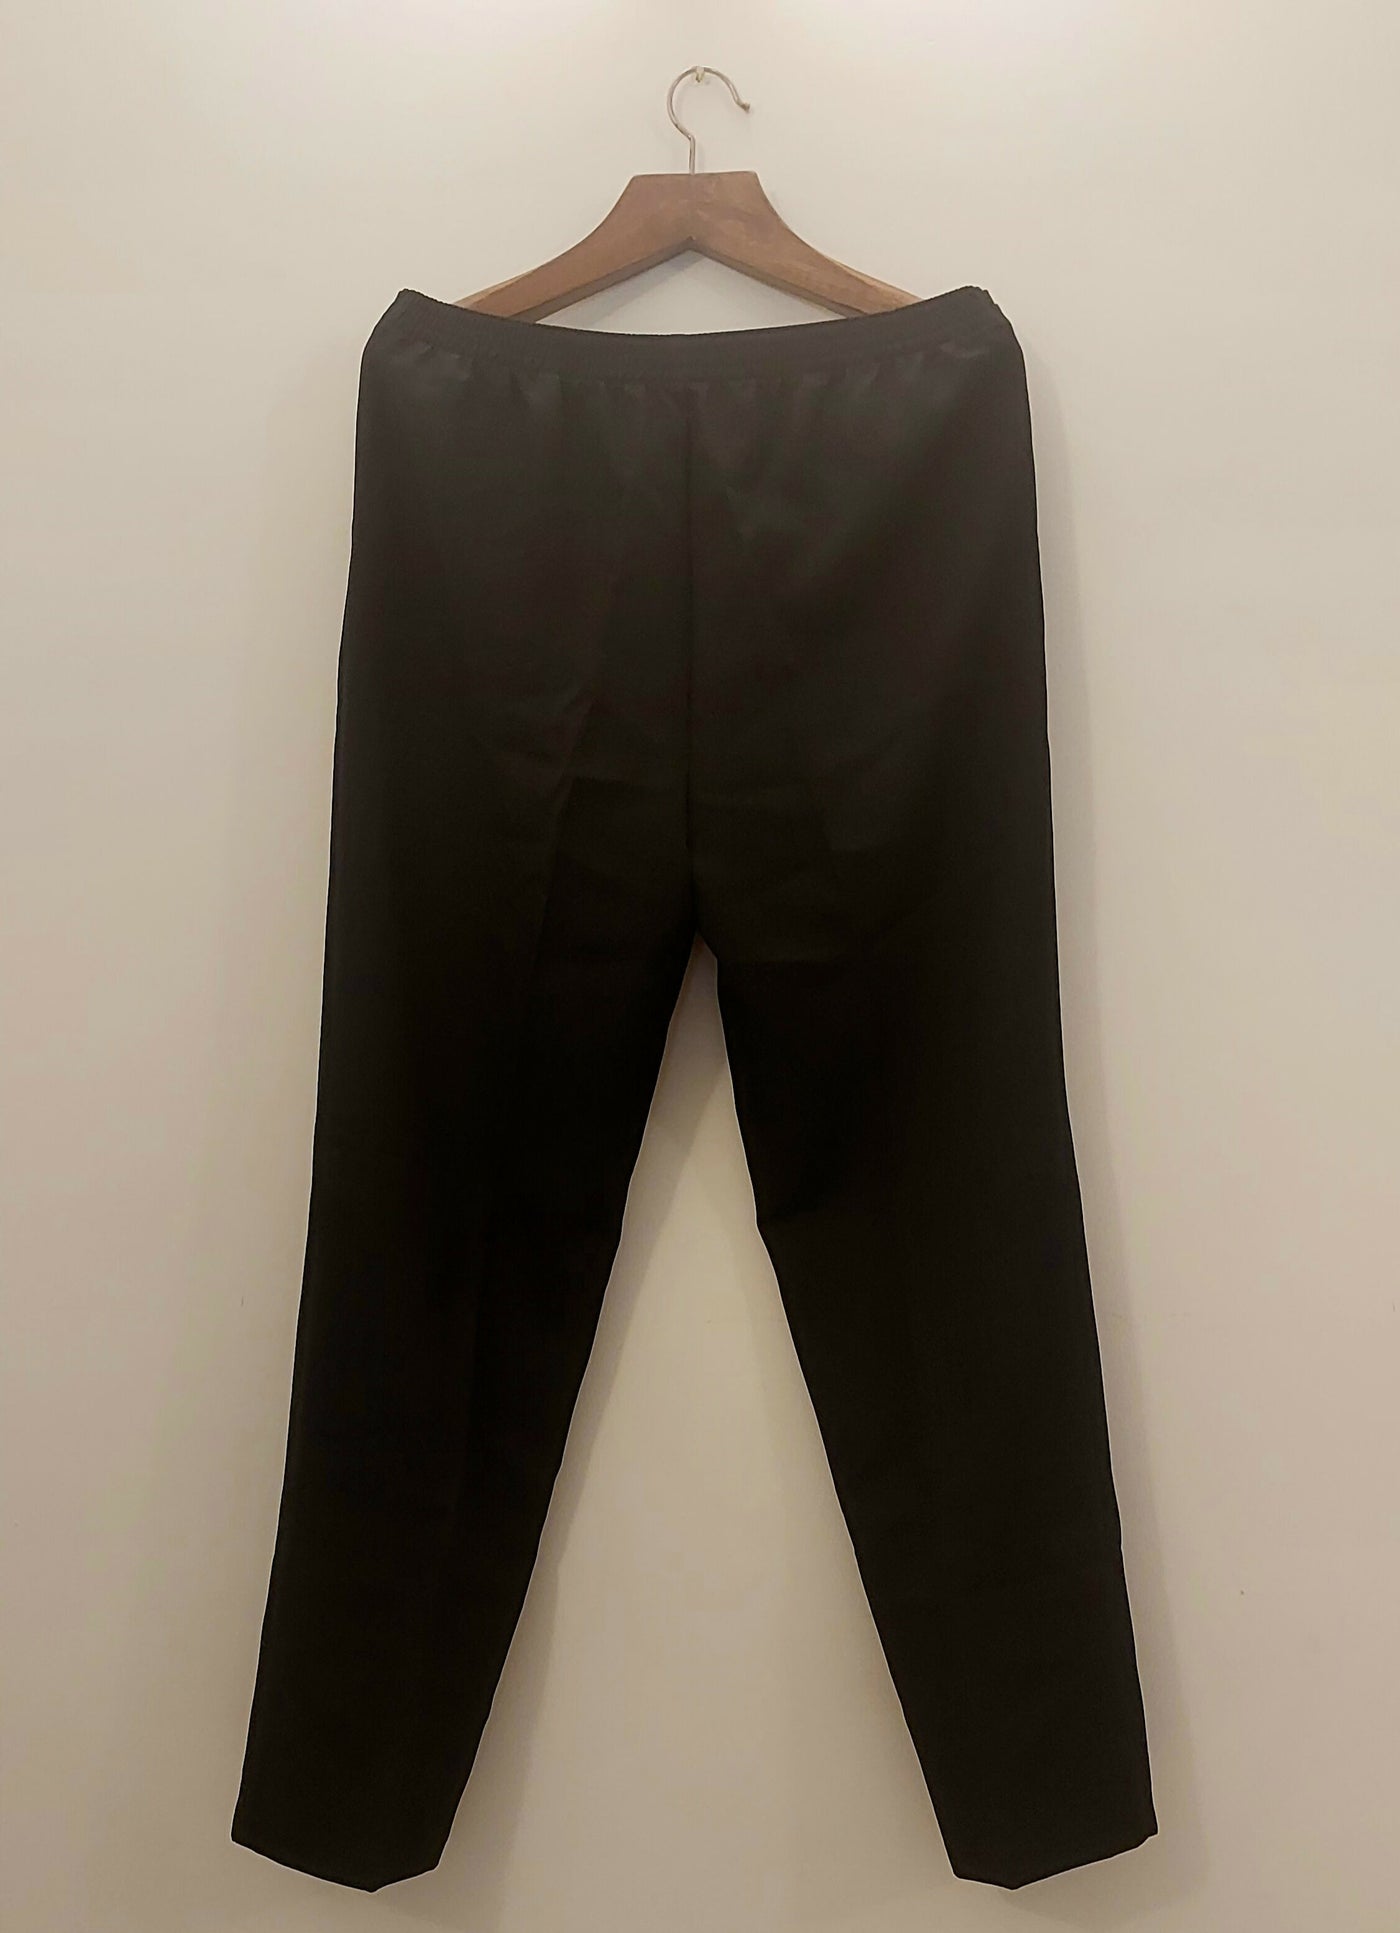 Navy Blue Tailored Pants